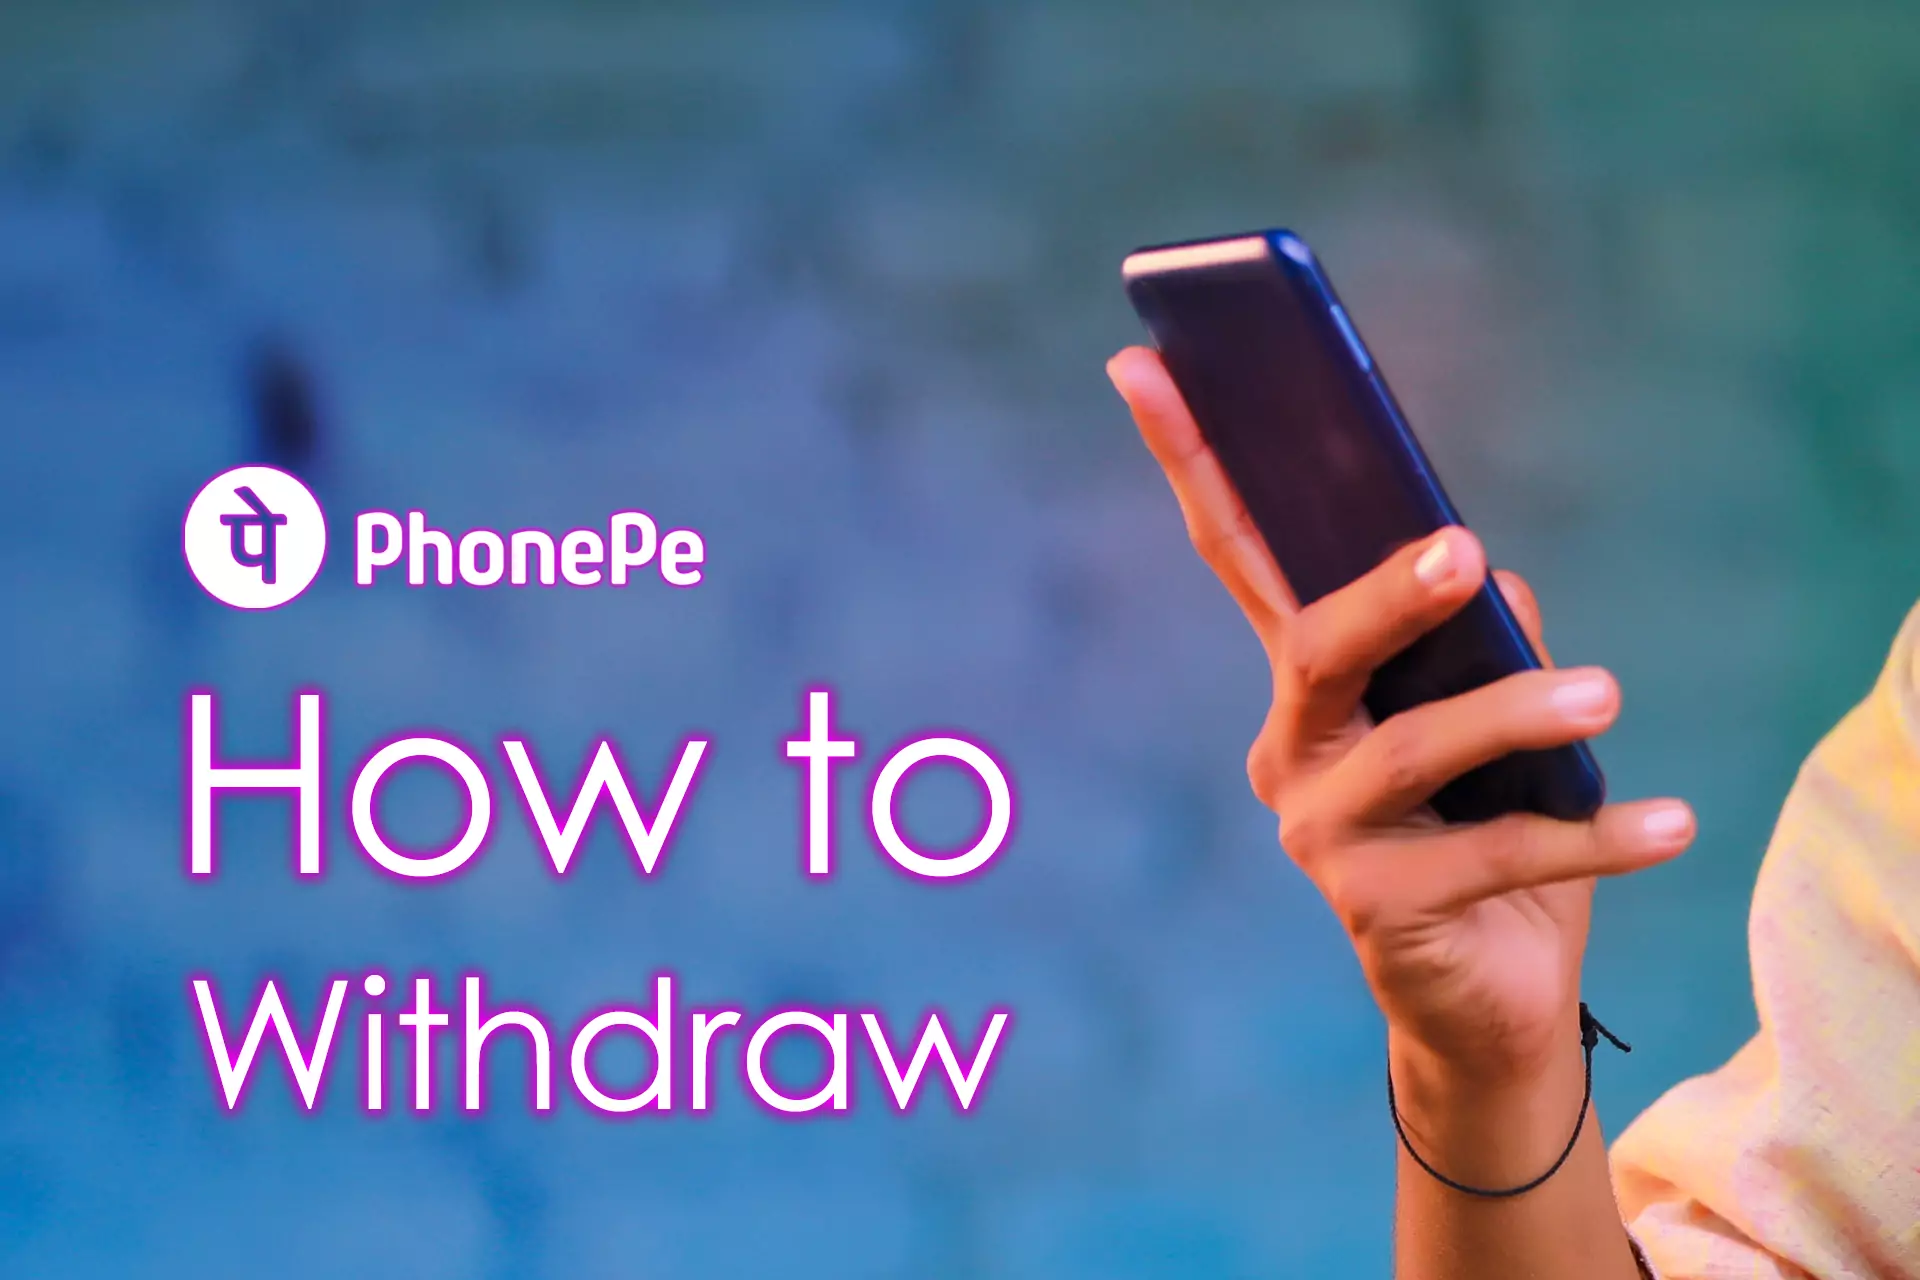 When you win playing the casino you can withdraw money to the PhonePe account.